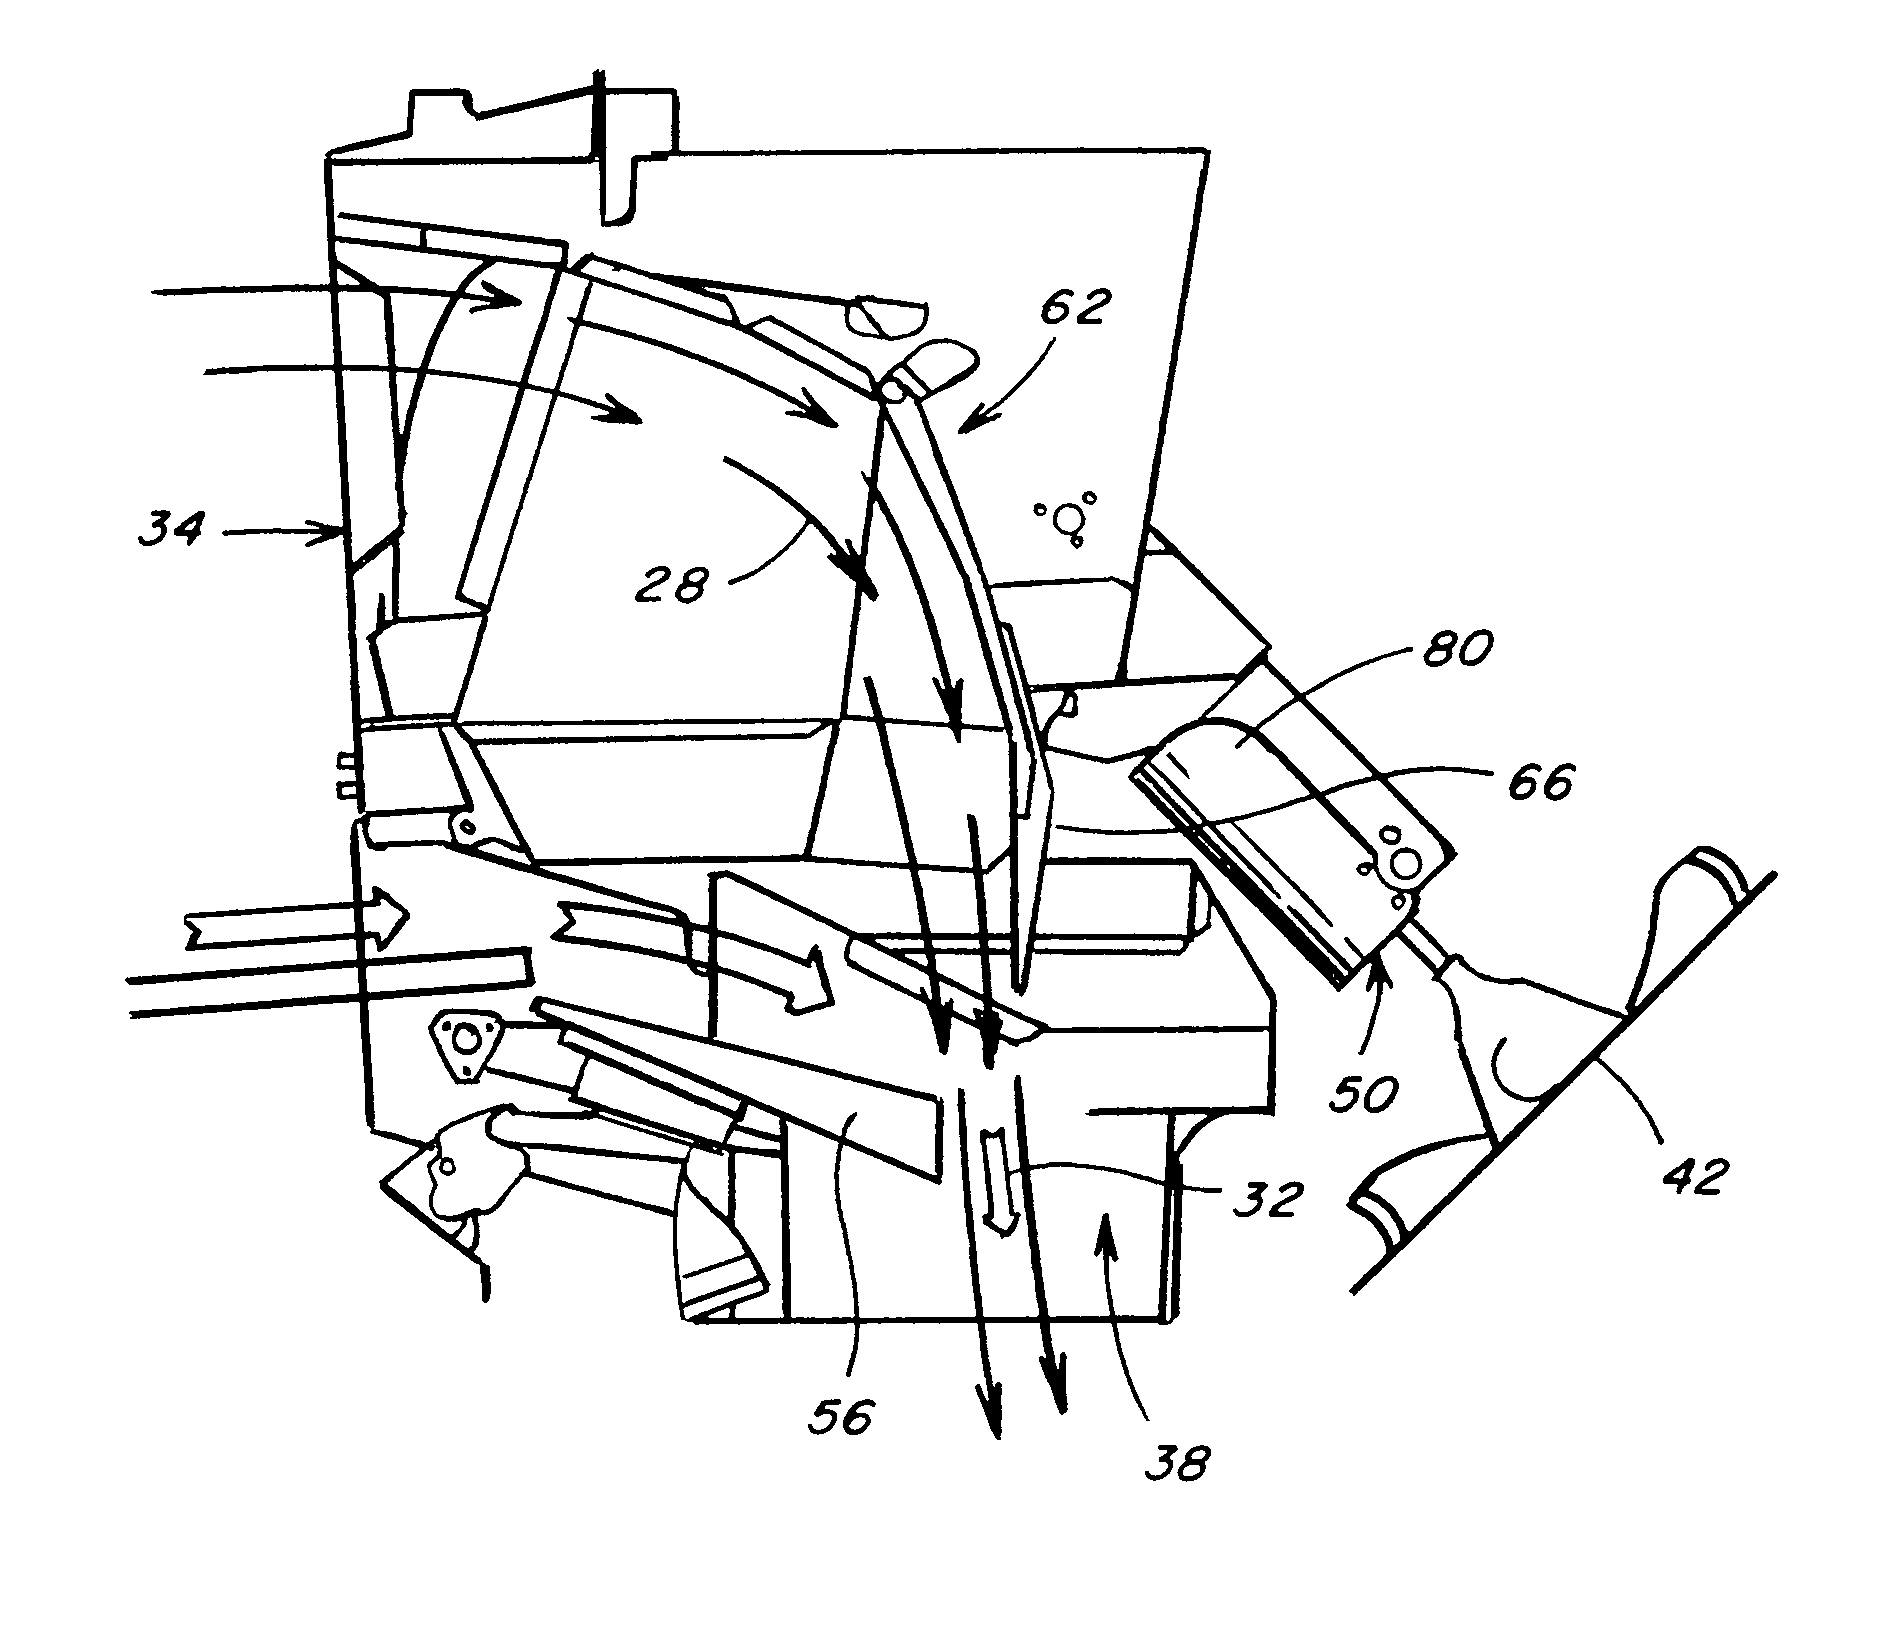 Crop residue distribution apparatus and system with cooperatively movable deflector door and spreader assembly